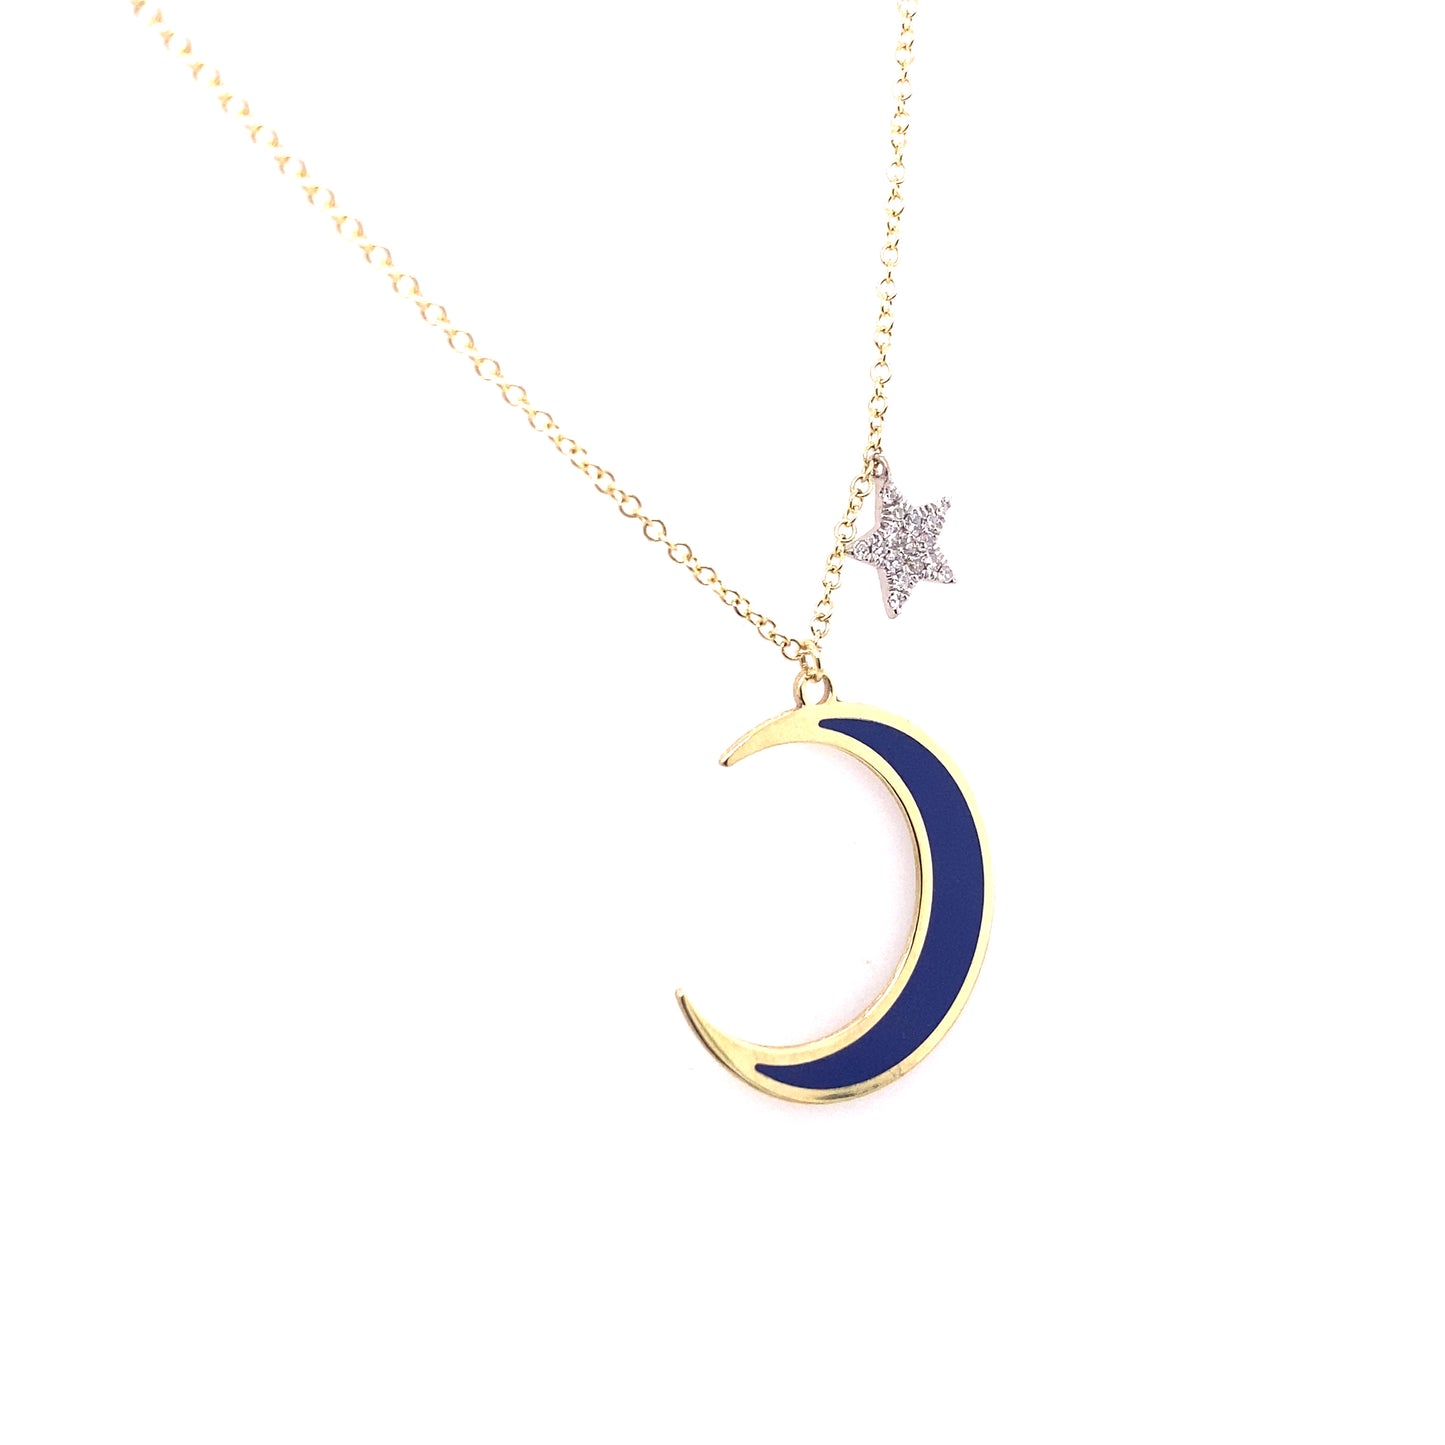 Meira T 14kt Yellow Gold Blue Enamel Moon and Star Diamond Charm Necklace